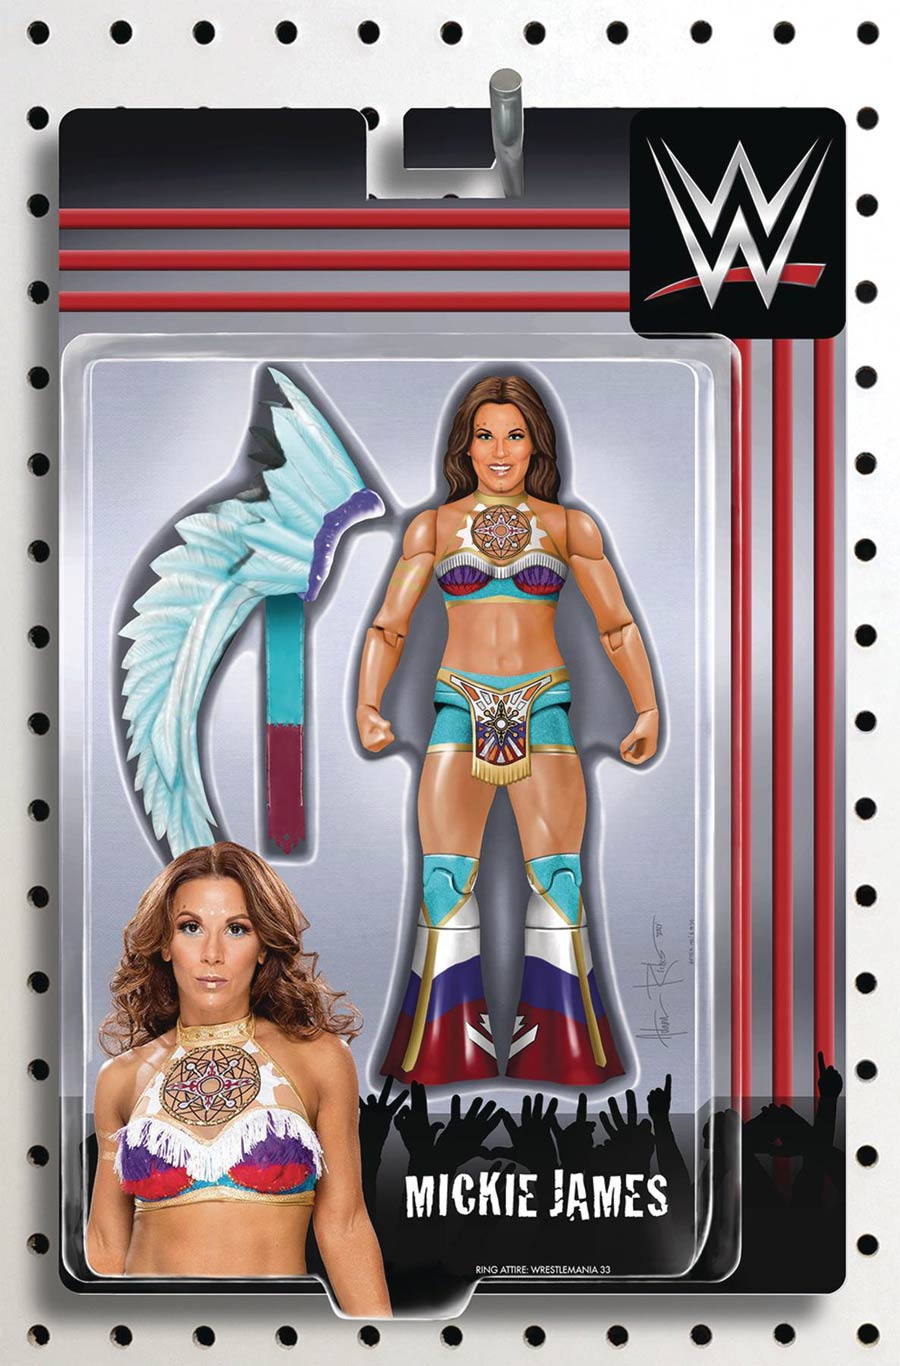 WWE #16 Action Figure Variant Edition (Riches) [2018]